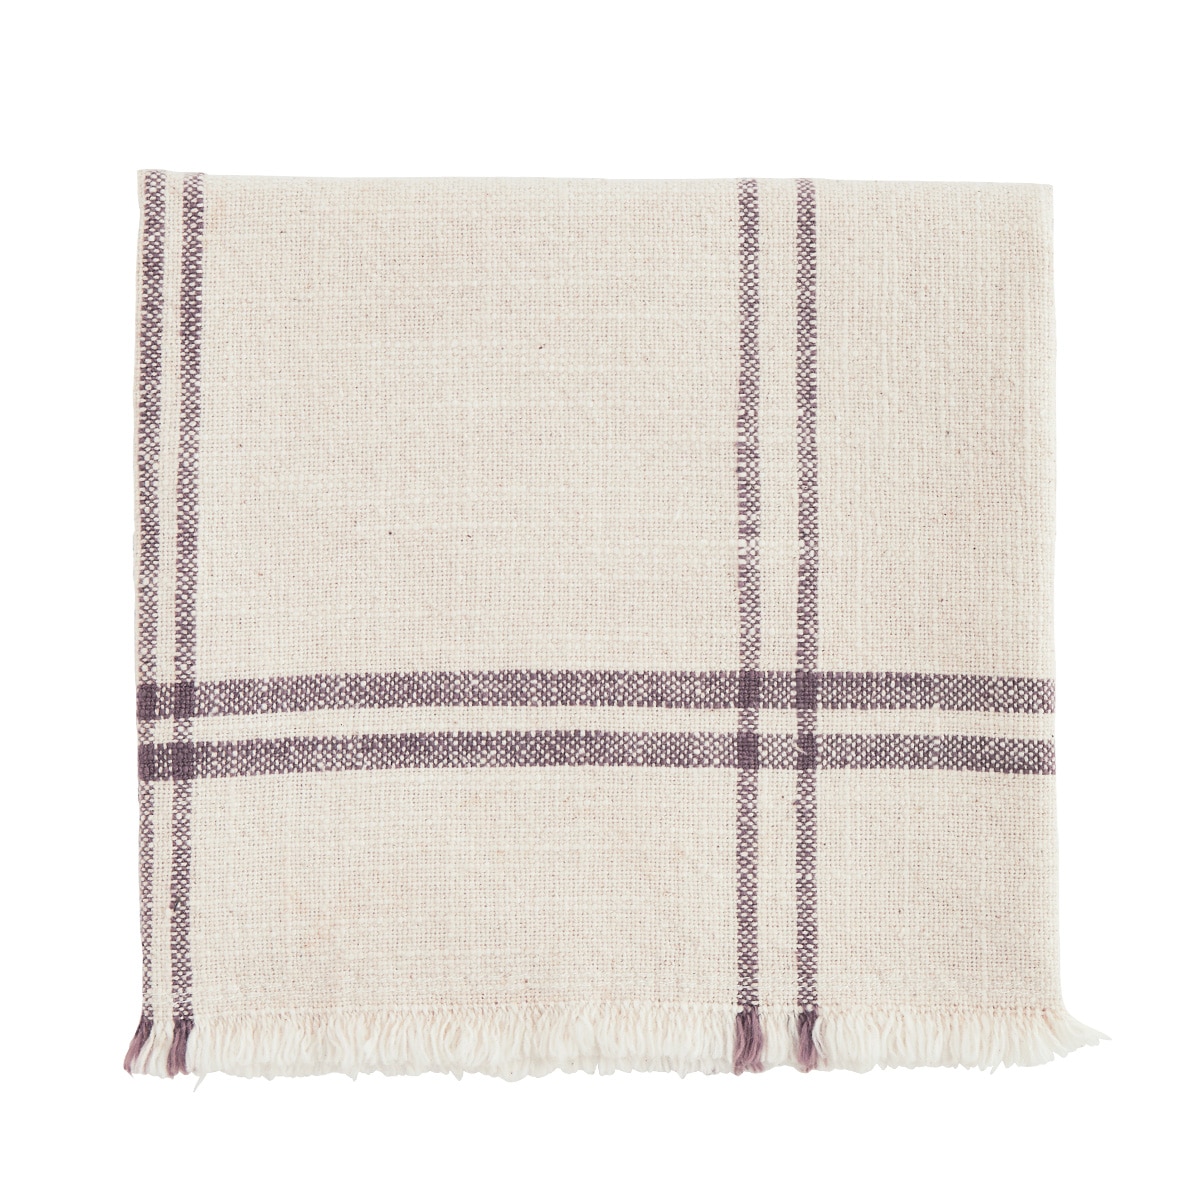 Checked Kitchen Towel w. Fringes